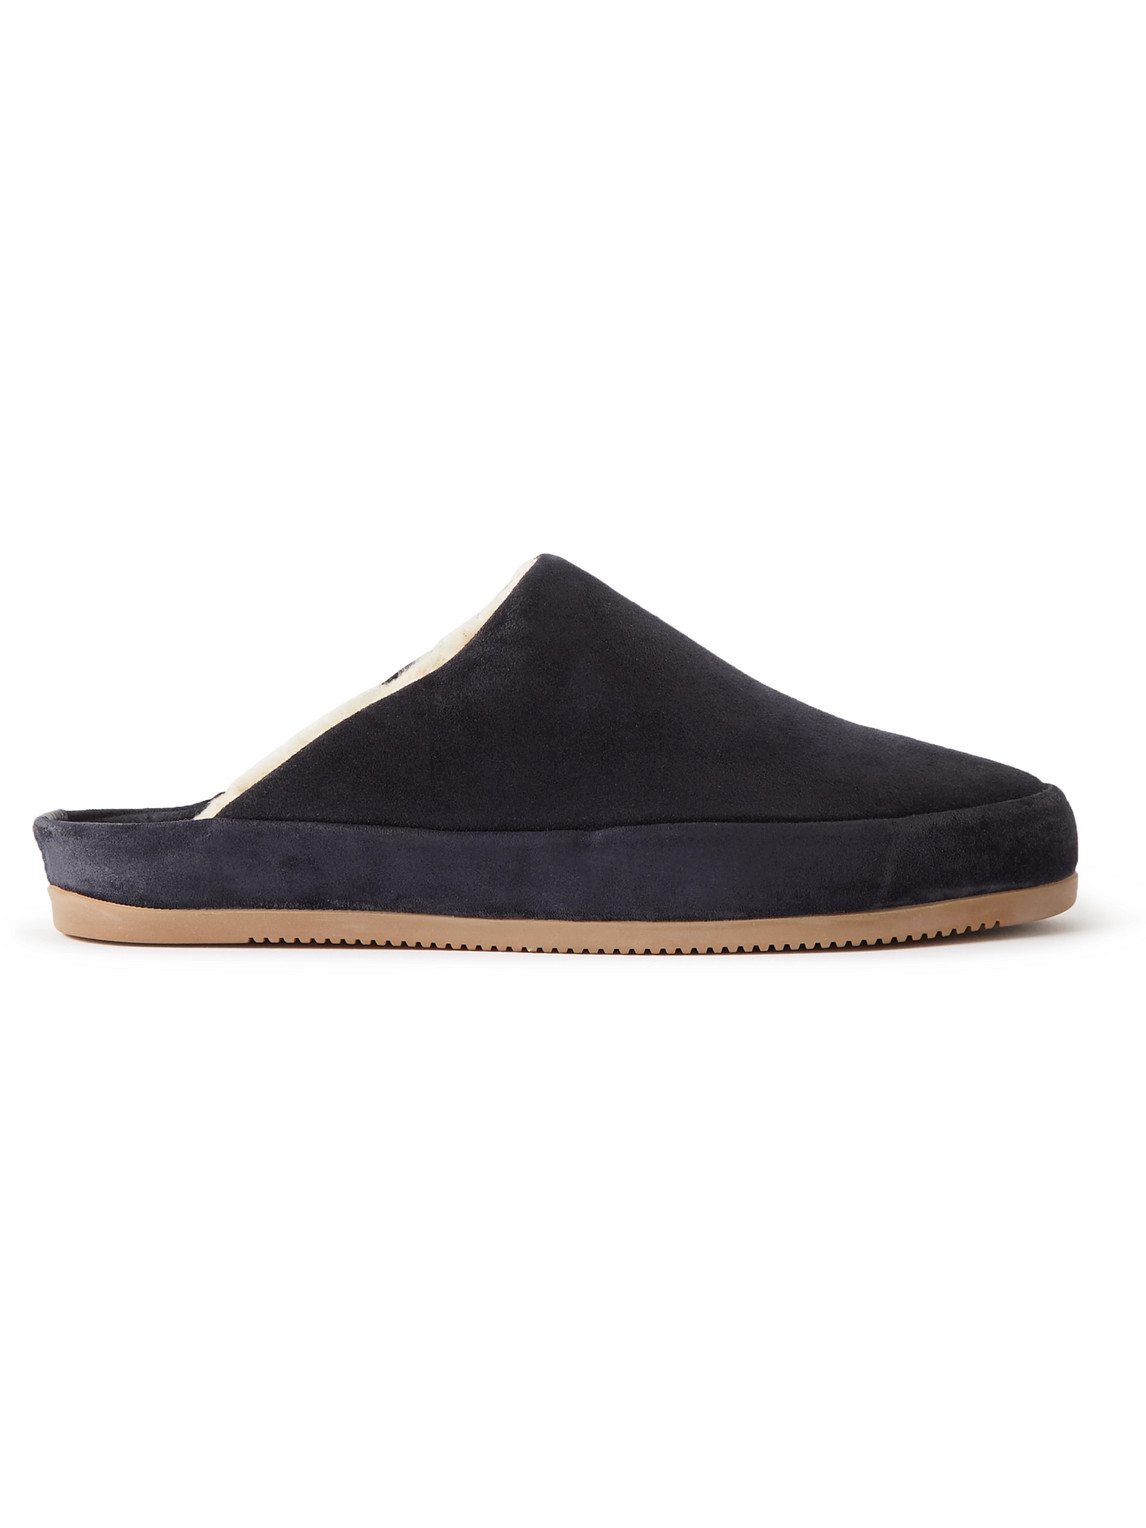 Mulo - Shearling-Lined Suede Slippers - Men - Blue - UK 10.5 von Mulo